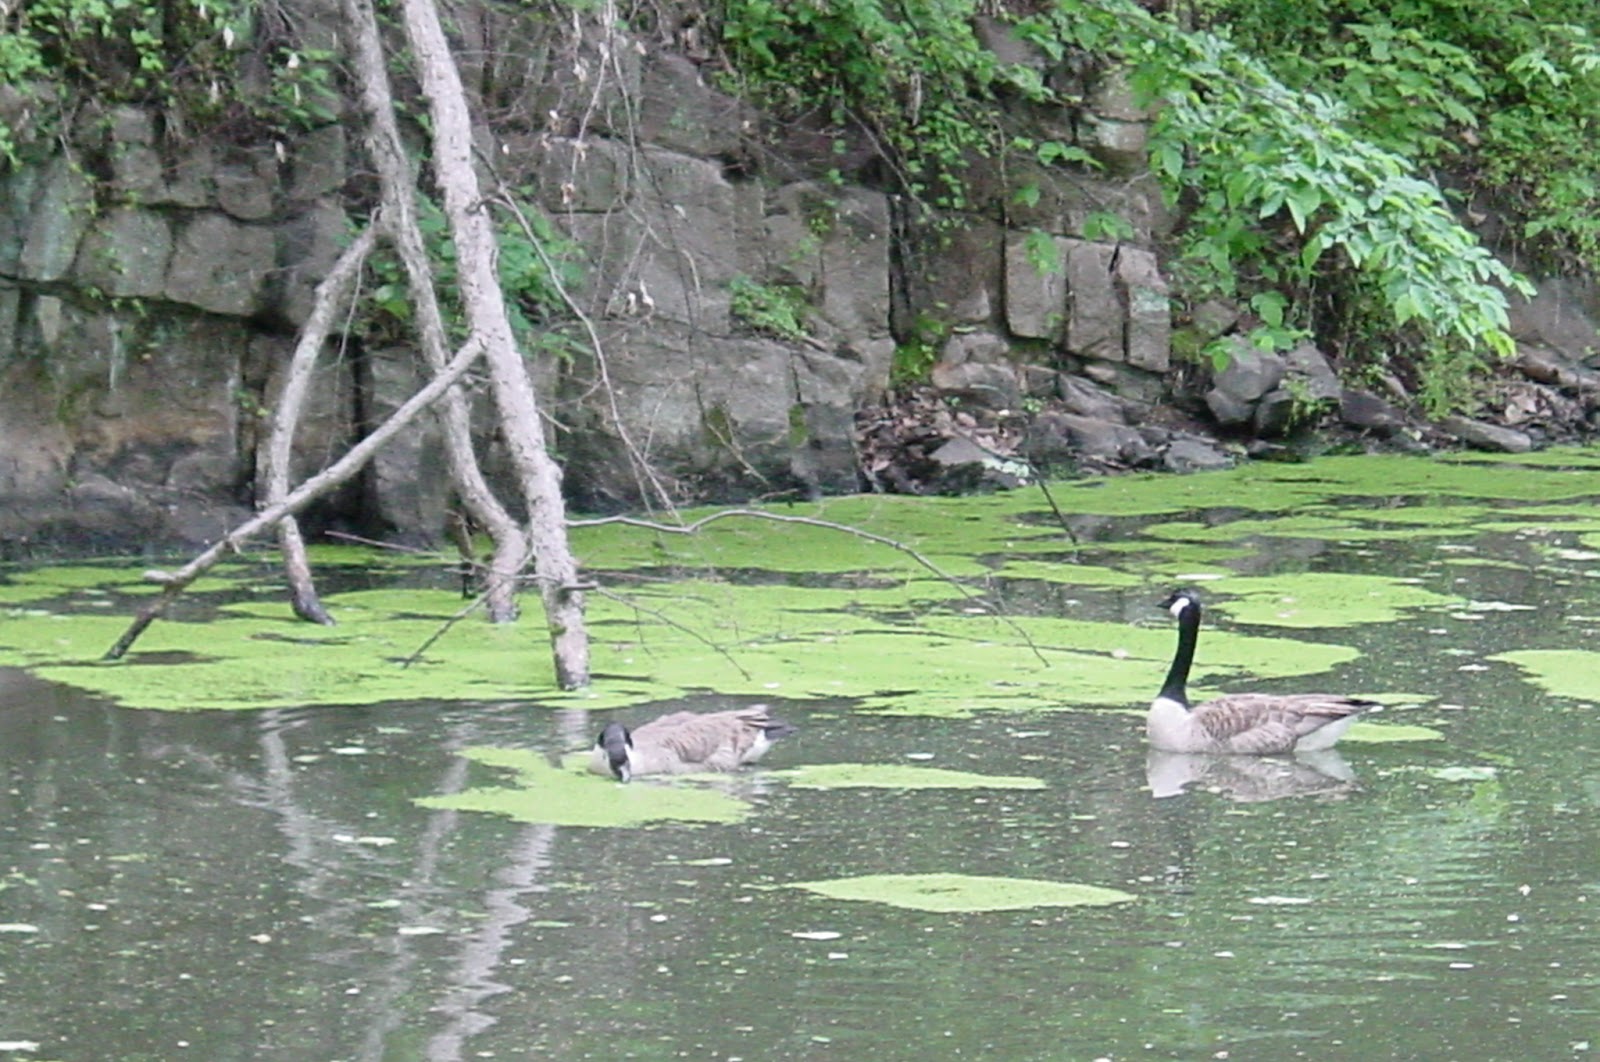 Geese swim in the placid green water of the Canal